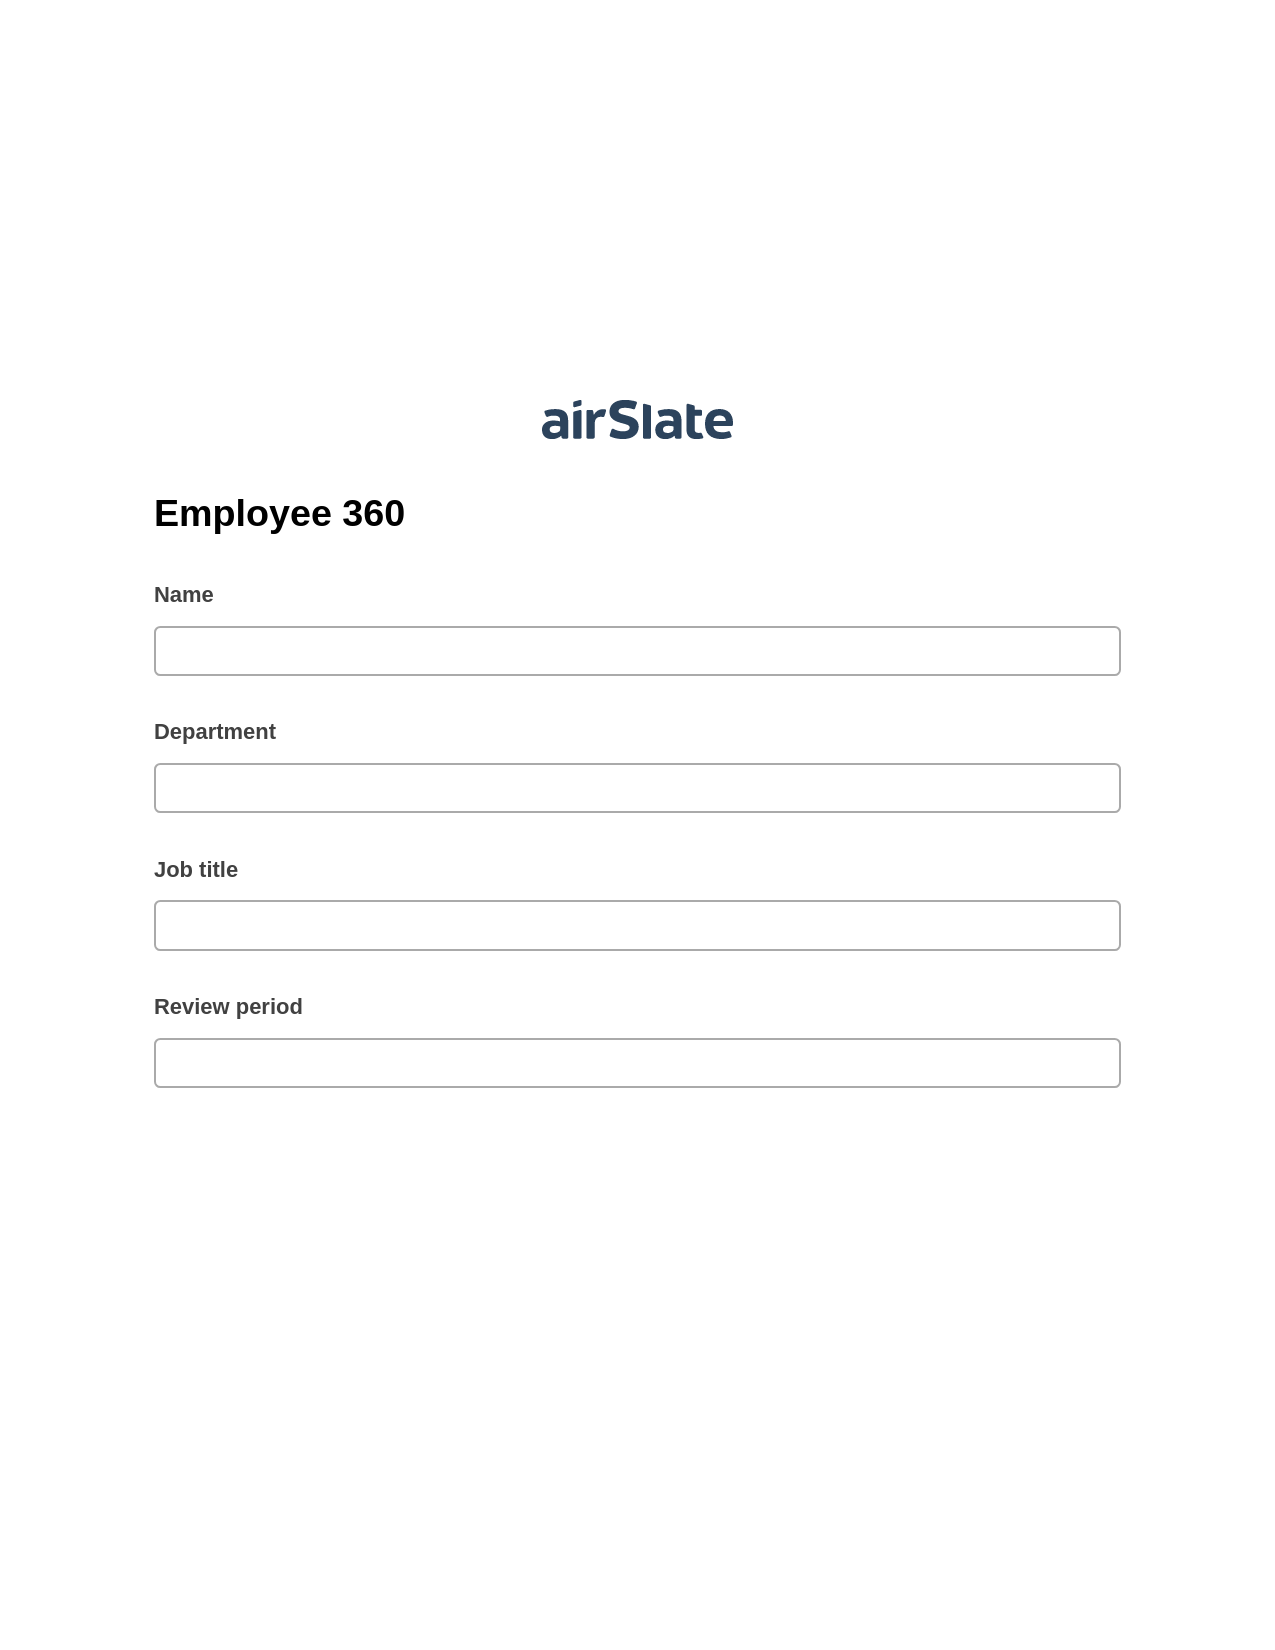 Employee 360 Prefill from NetSuite records, Update MS Dynamics 365 Record Bot, Export to Salesforce Record Bot